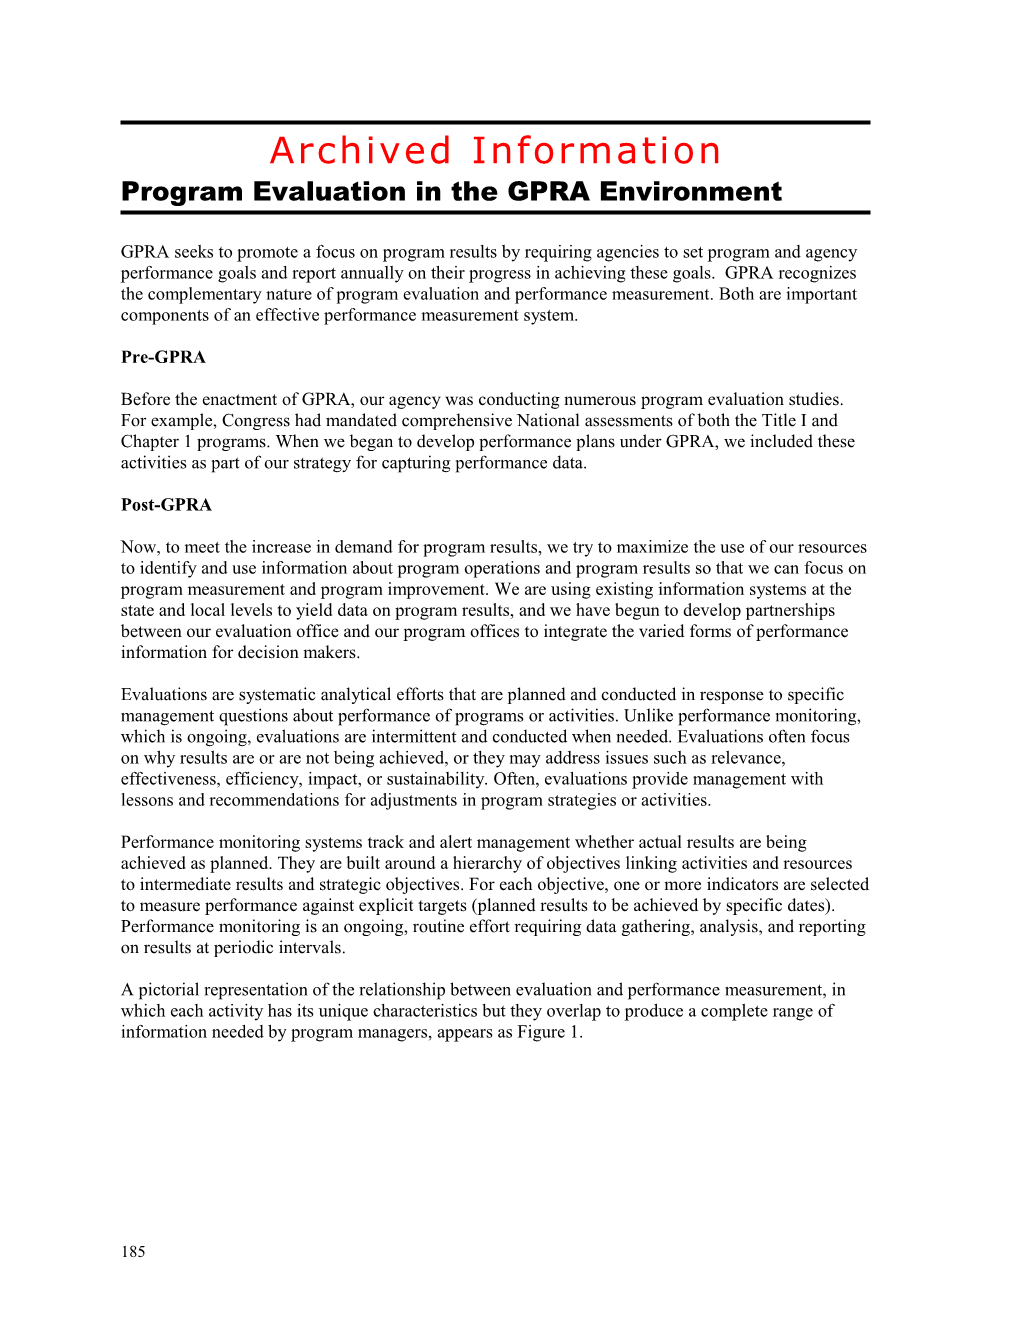 Archived: Program Evaluation in the GPRA Environment